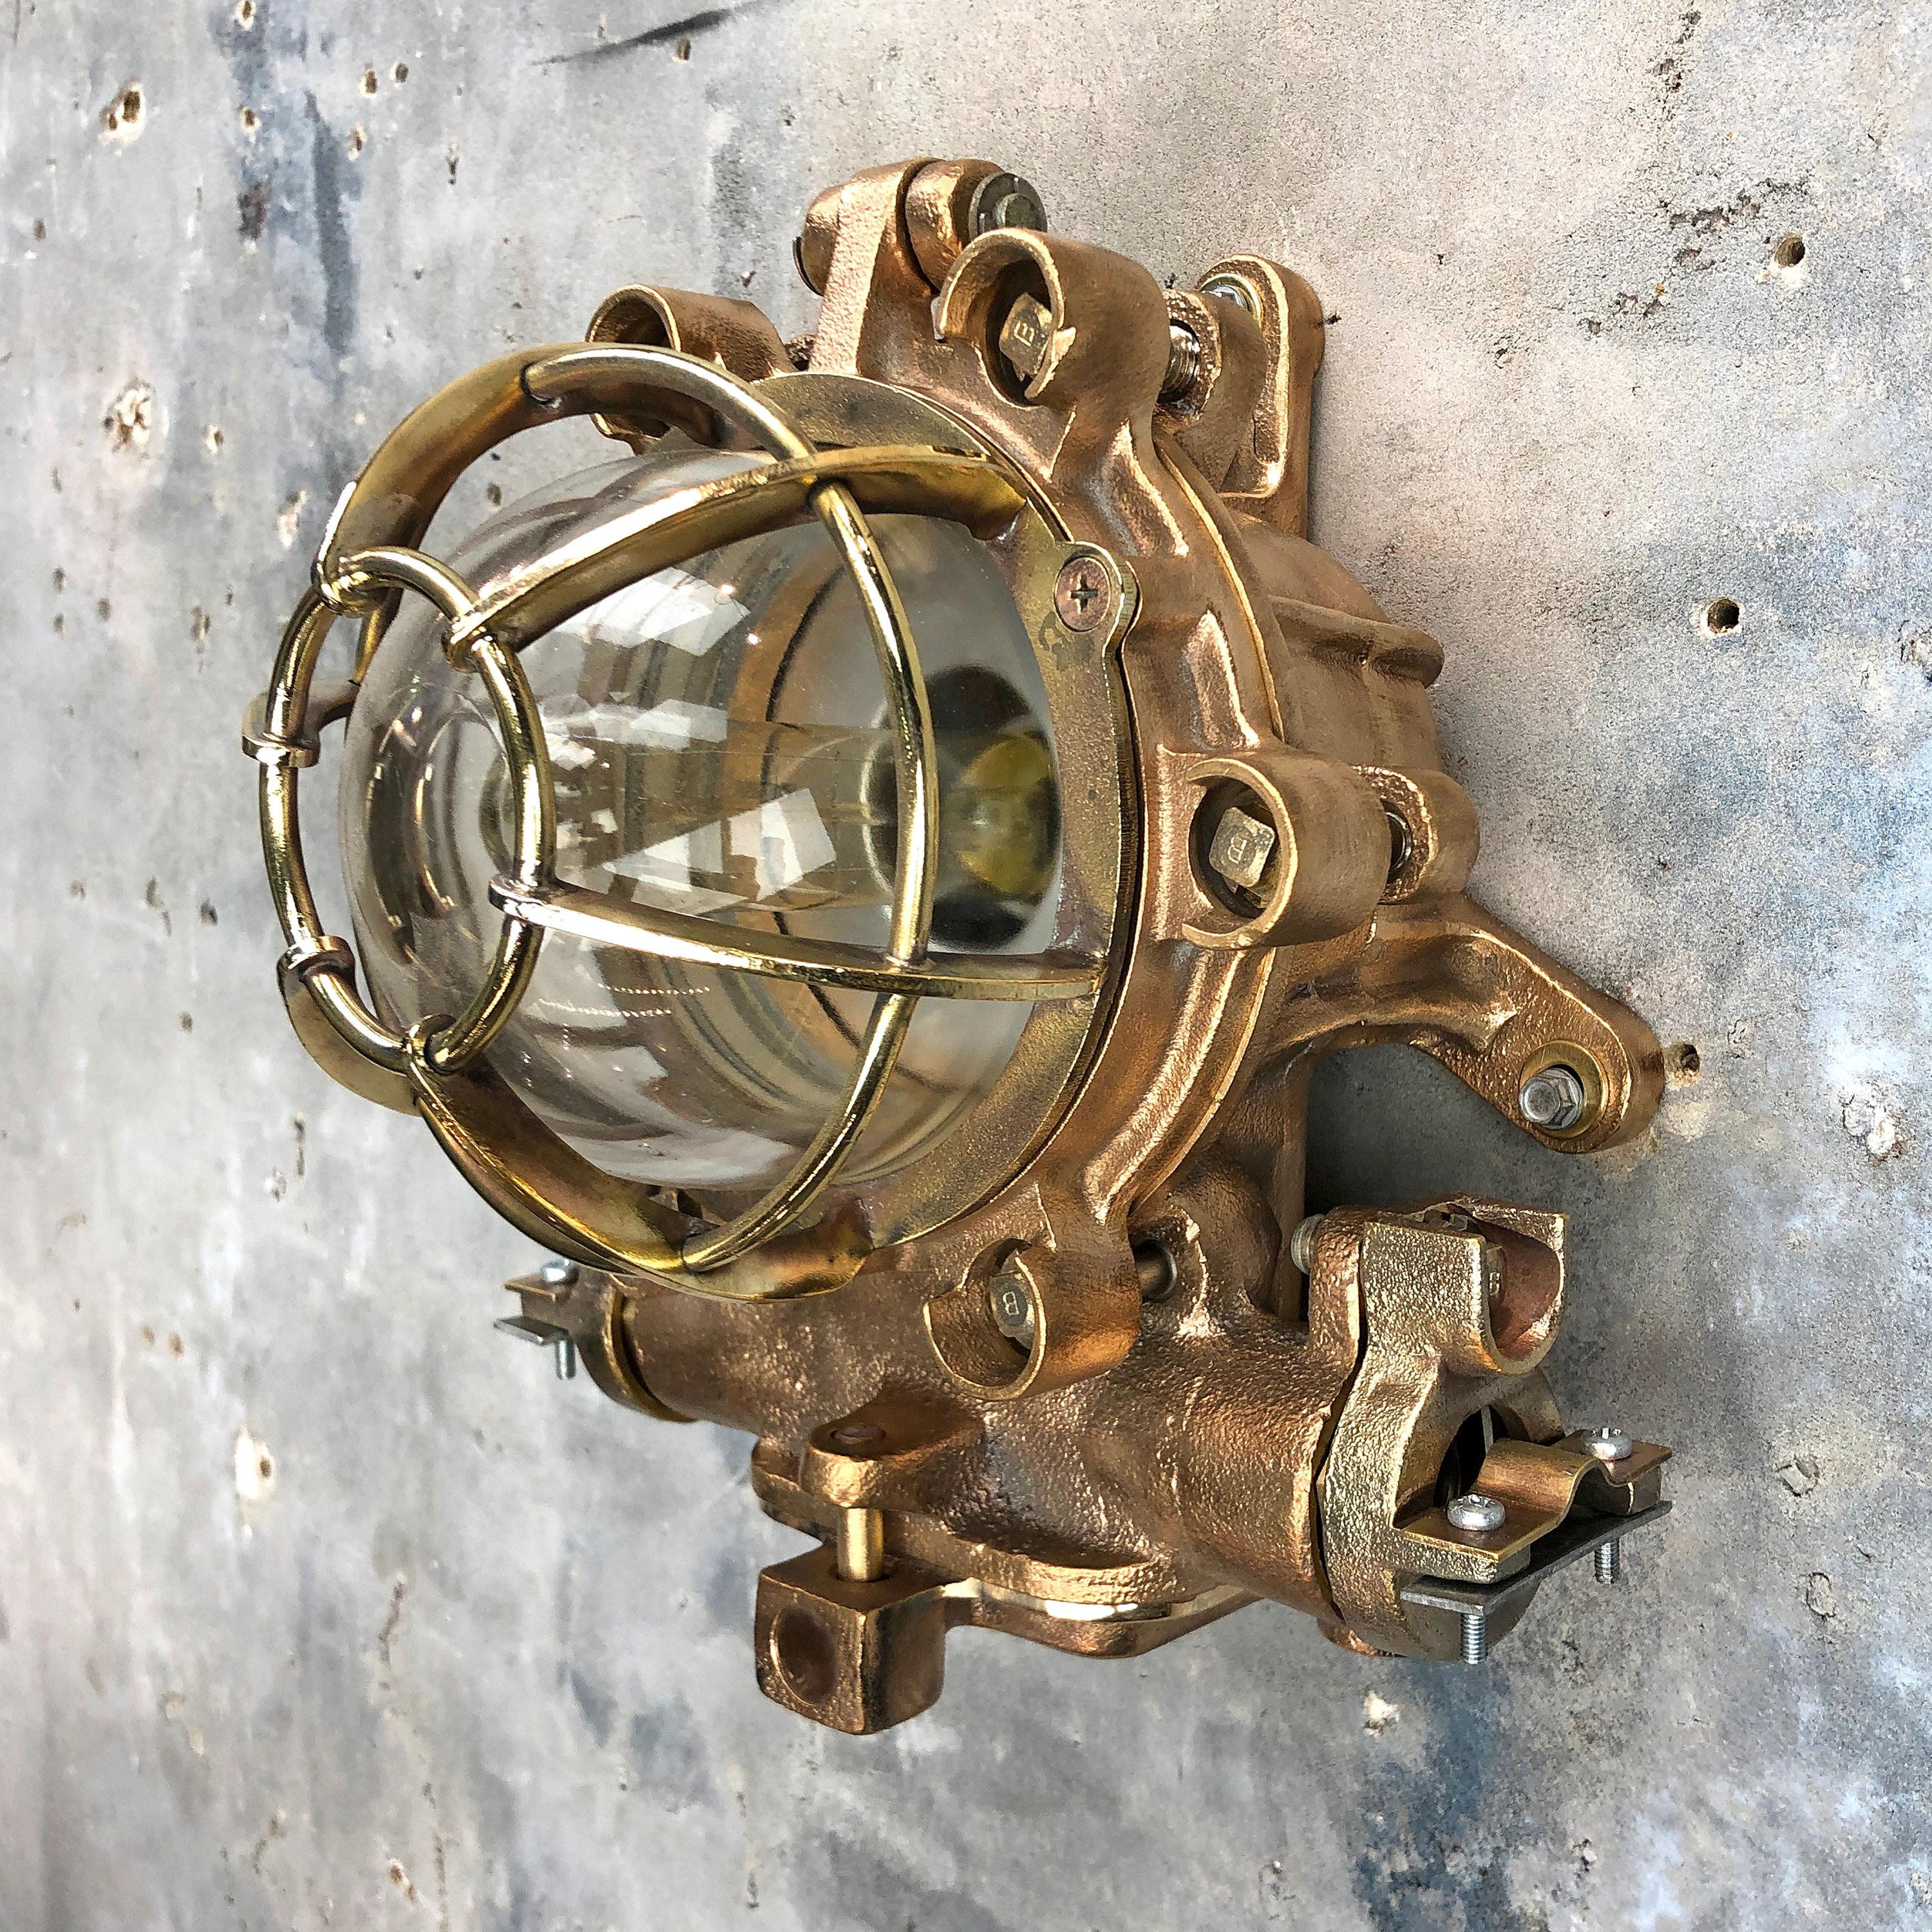 1990s Japanese Cast Bronze, Brass and Glass Explosion Proof Wall Light with Cage In Good Condition For Sale In Leicester, Leicestershire